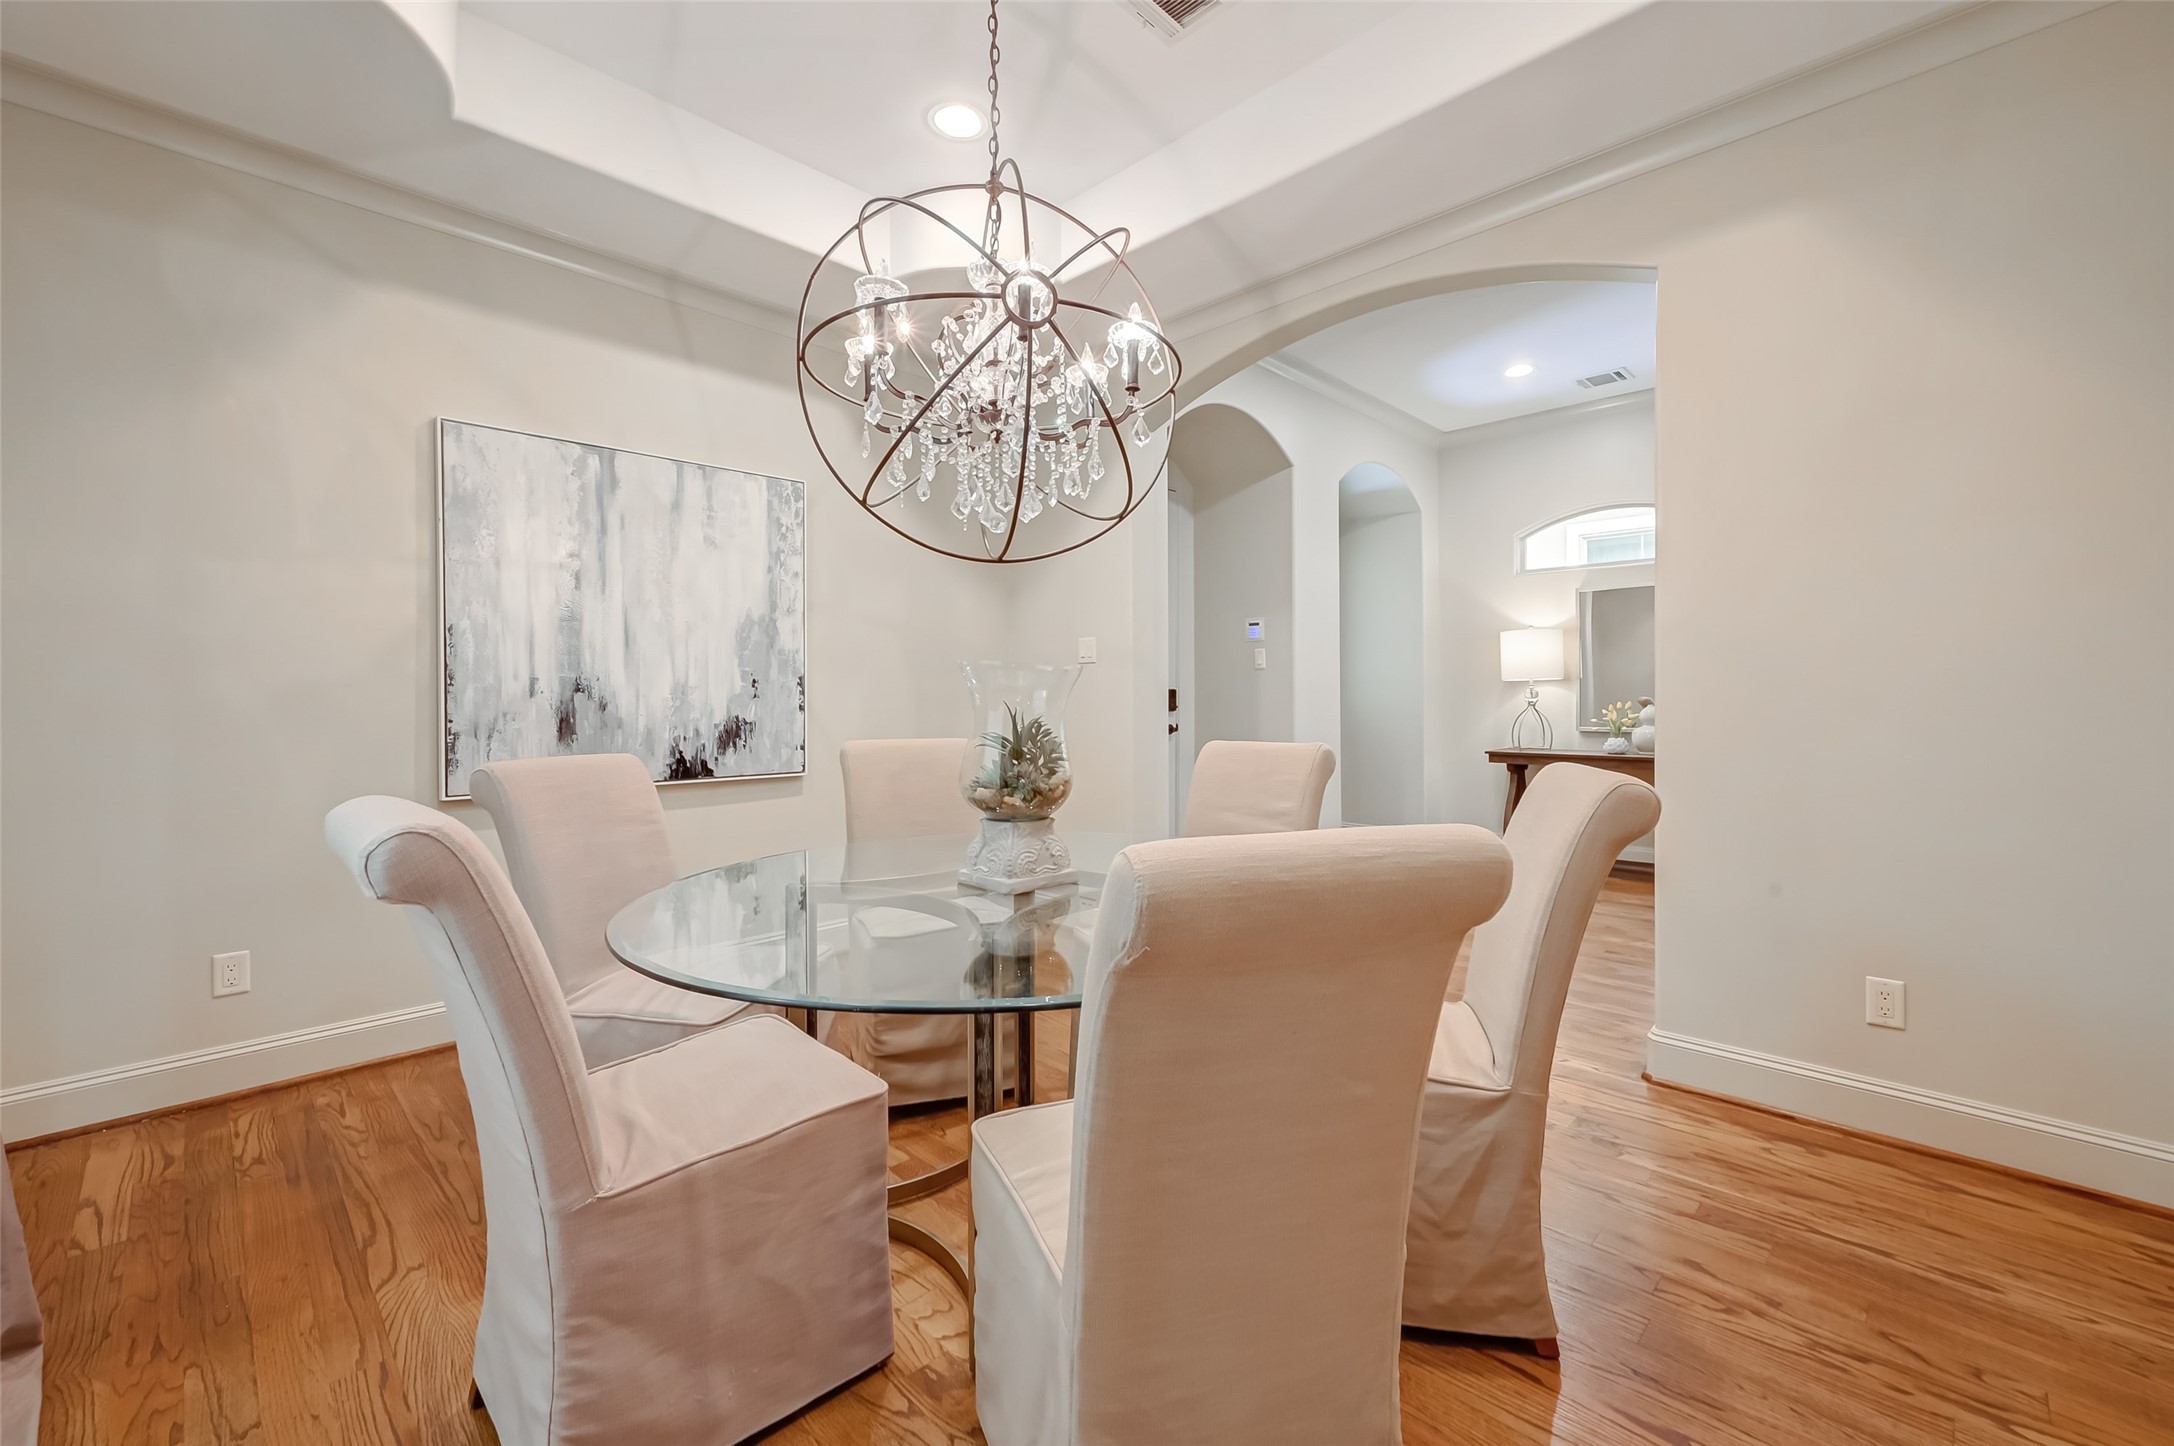 The formal dining room adjacent to the kitchen offers drapes and coffered ceiling, and can accommodate a great  dining room table to celebrate any events with your family and friends. Chandelier is excluded from the sale.